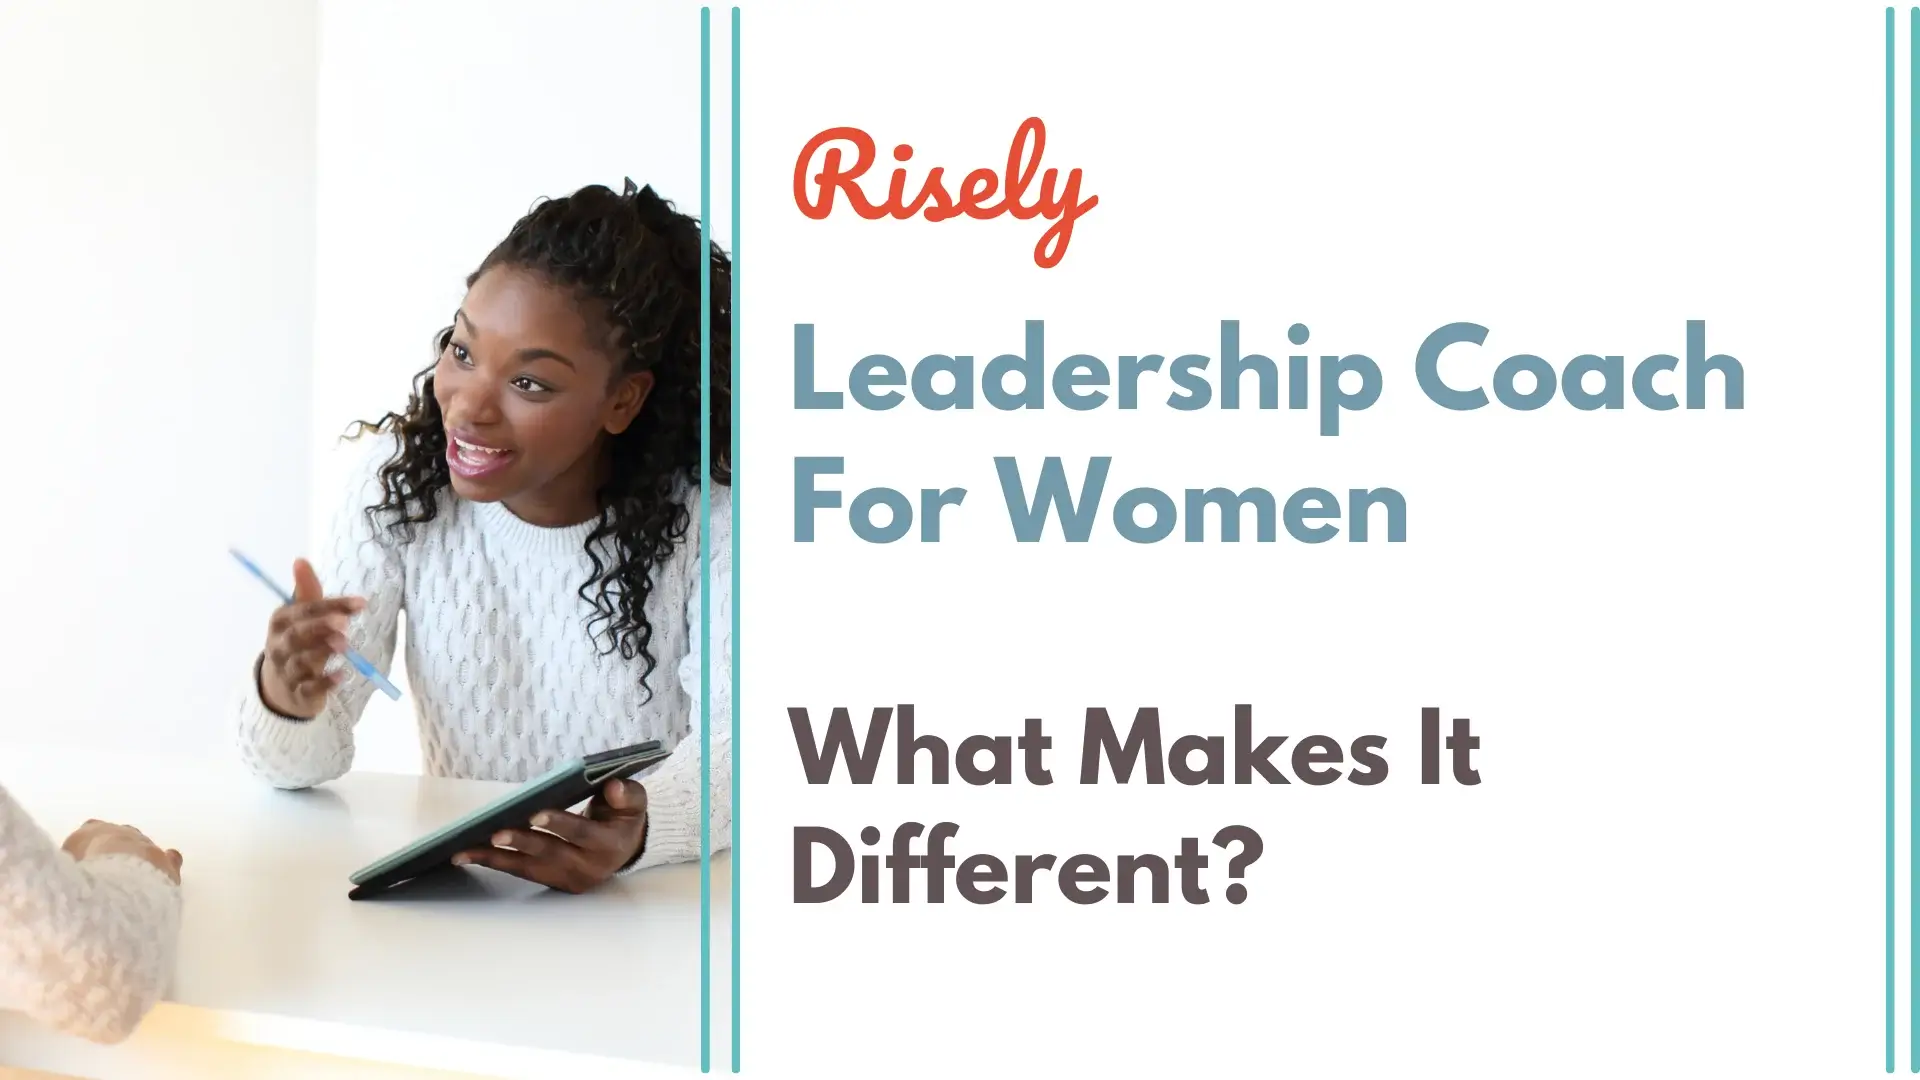 Leadership Coach For Women: What Makes It Different